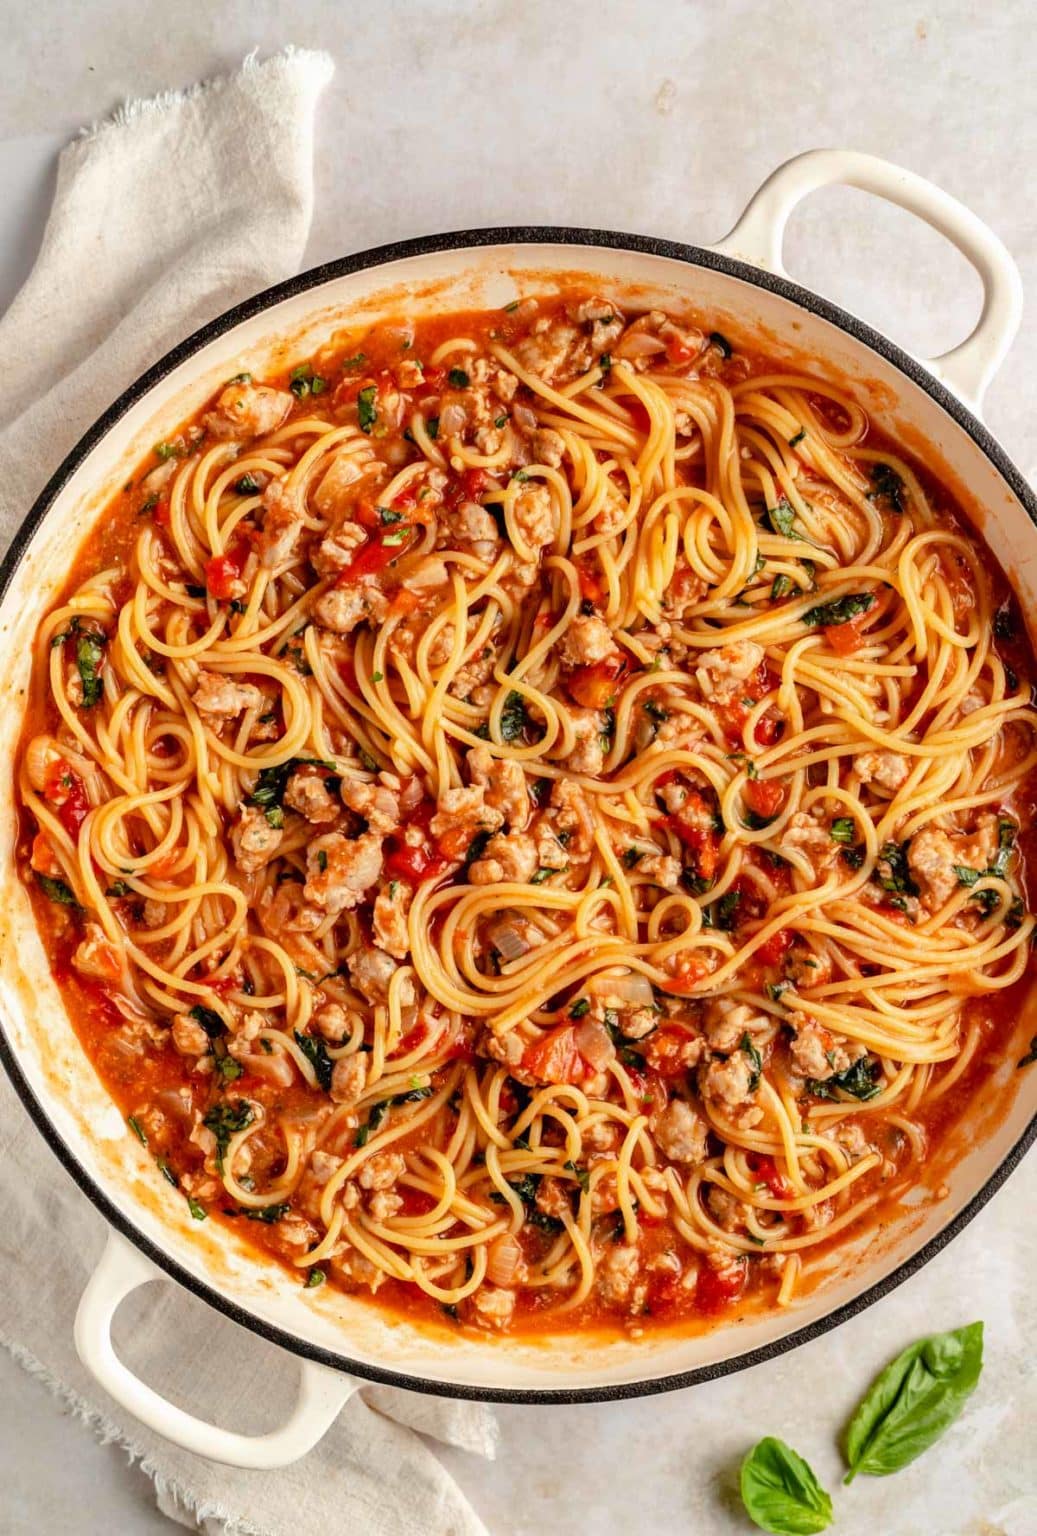 Pasta with Sausage and Fire Roasted Tomatoes - Kim's Cravings